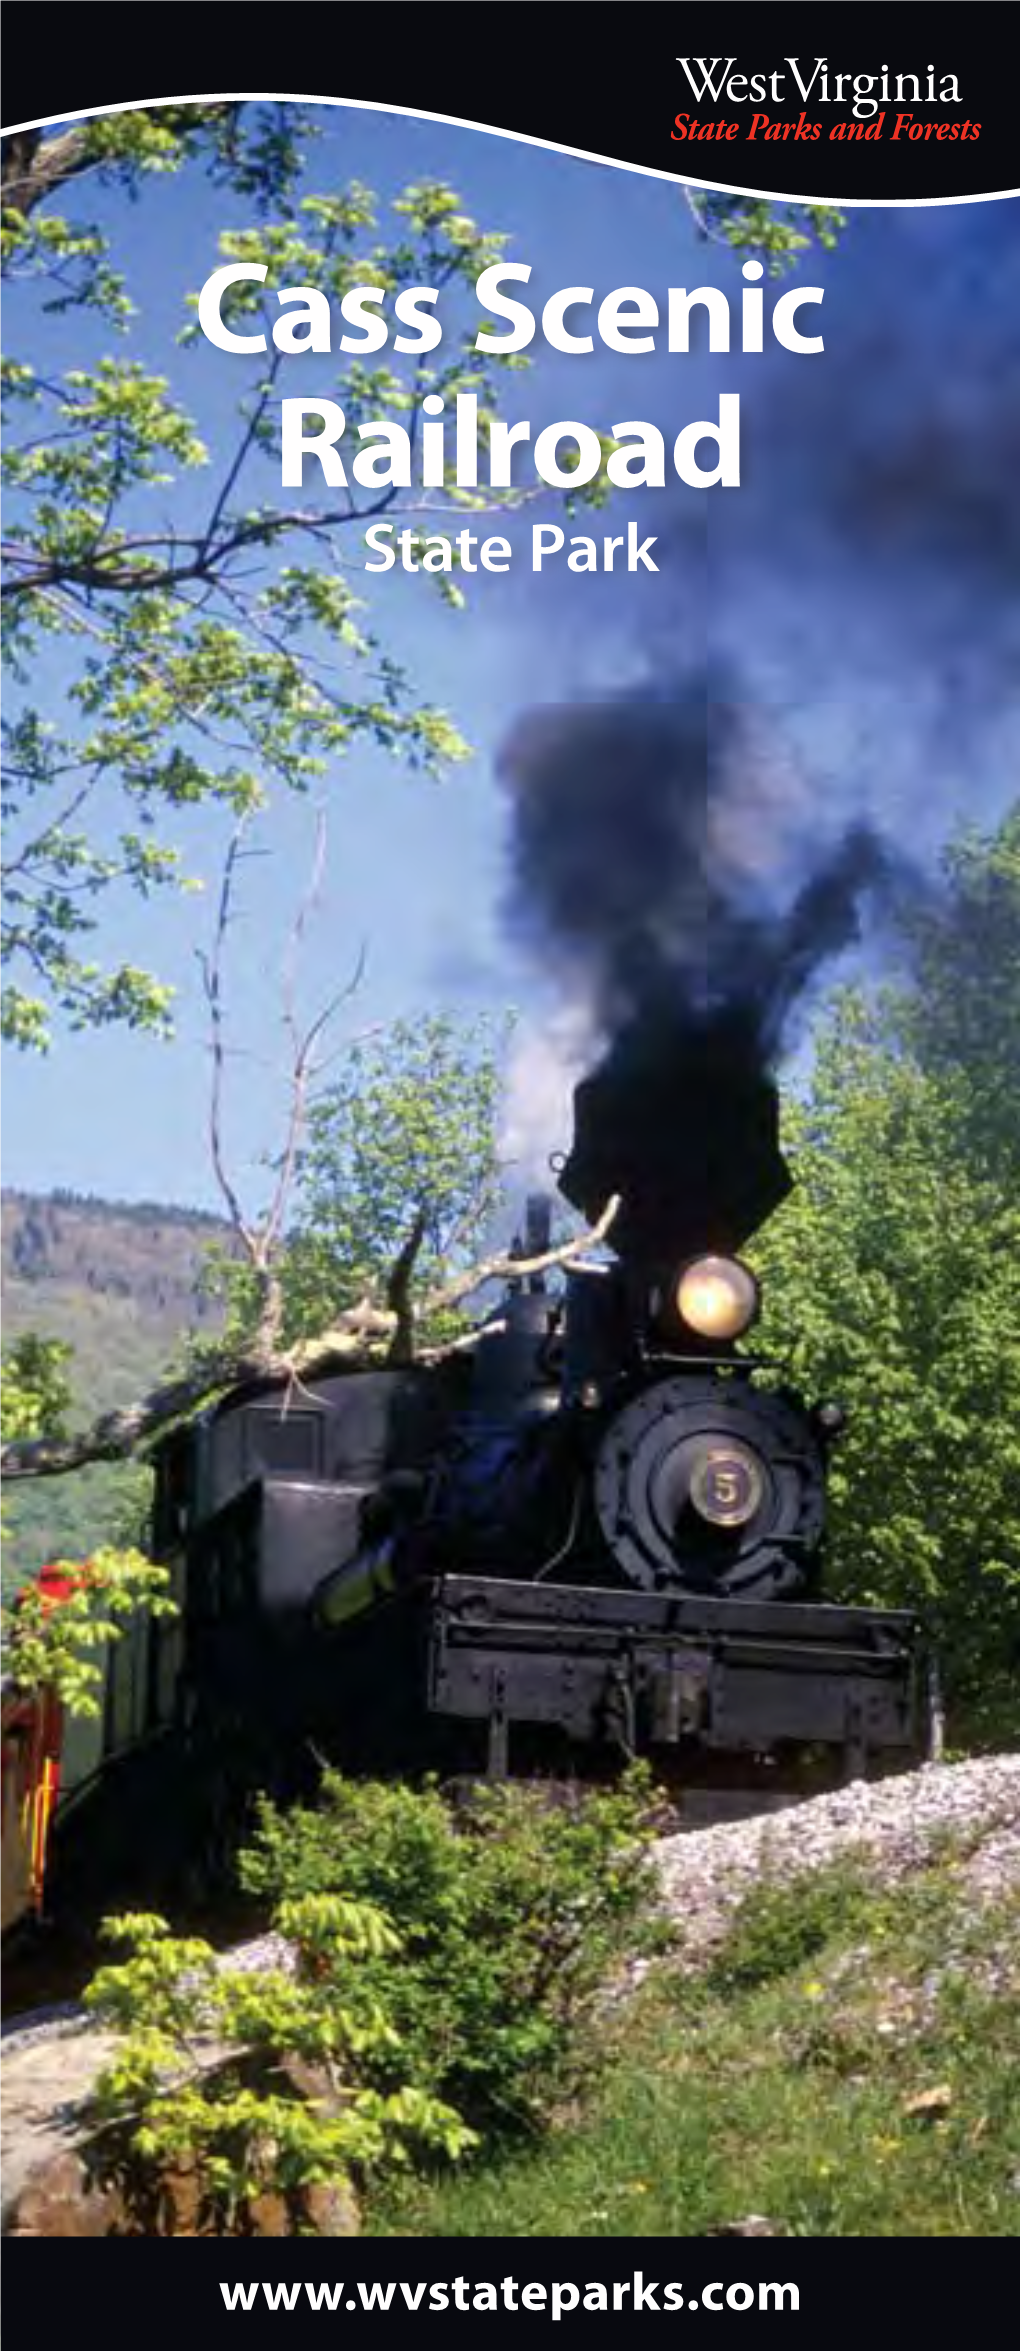 Cass Scenic Railroad Directly, Or by Dialing Toll-Free 1-800 CALL WVA